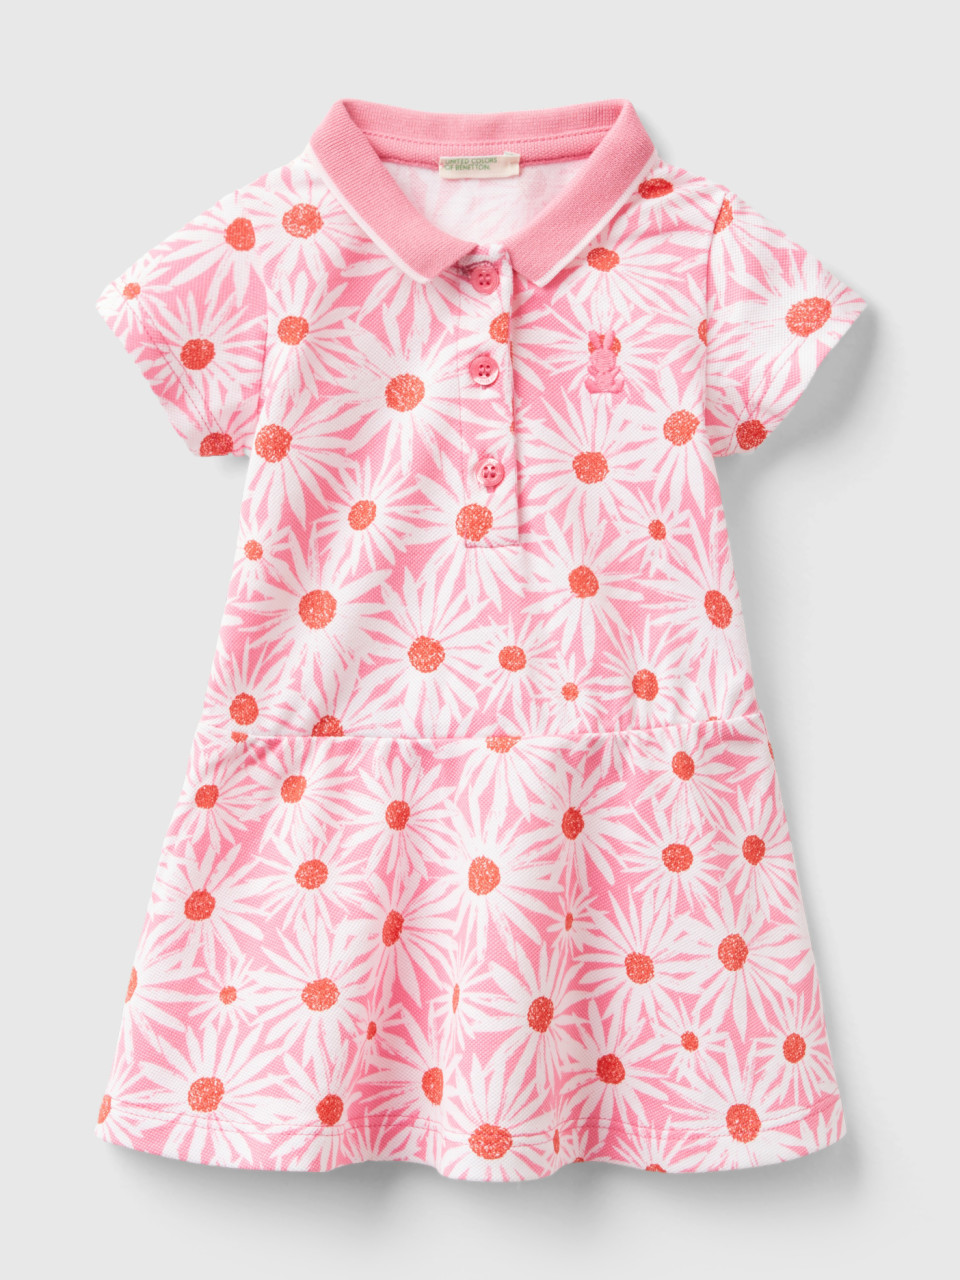 Benetton, Polo-style Dress With Floral Print, Soft Pink, Kids